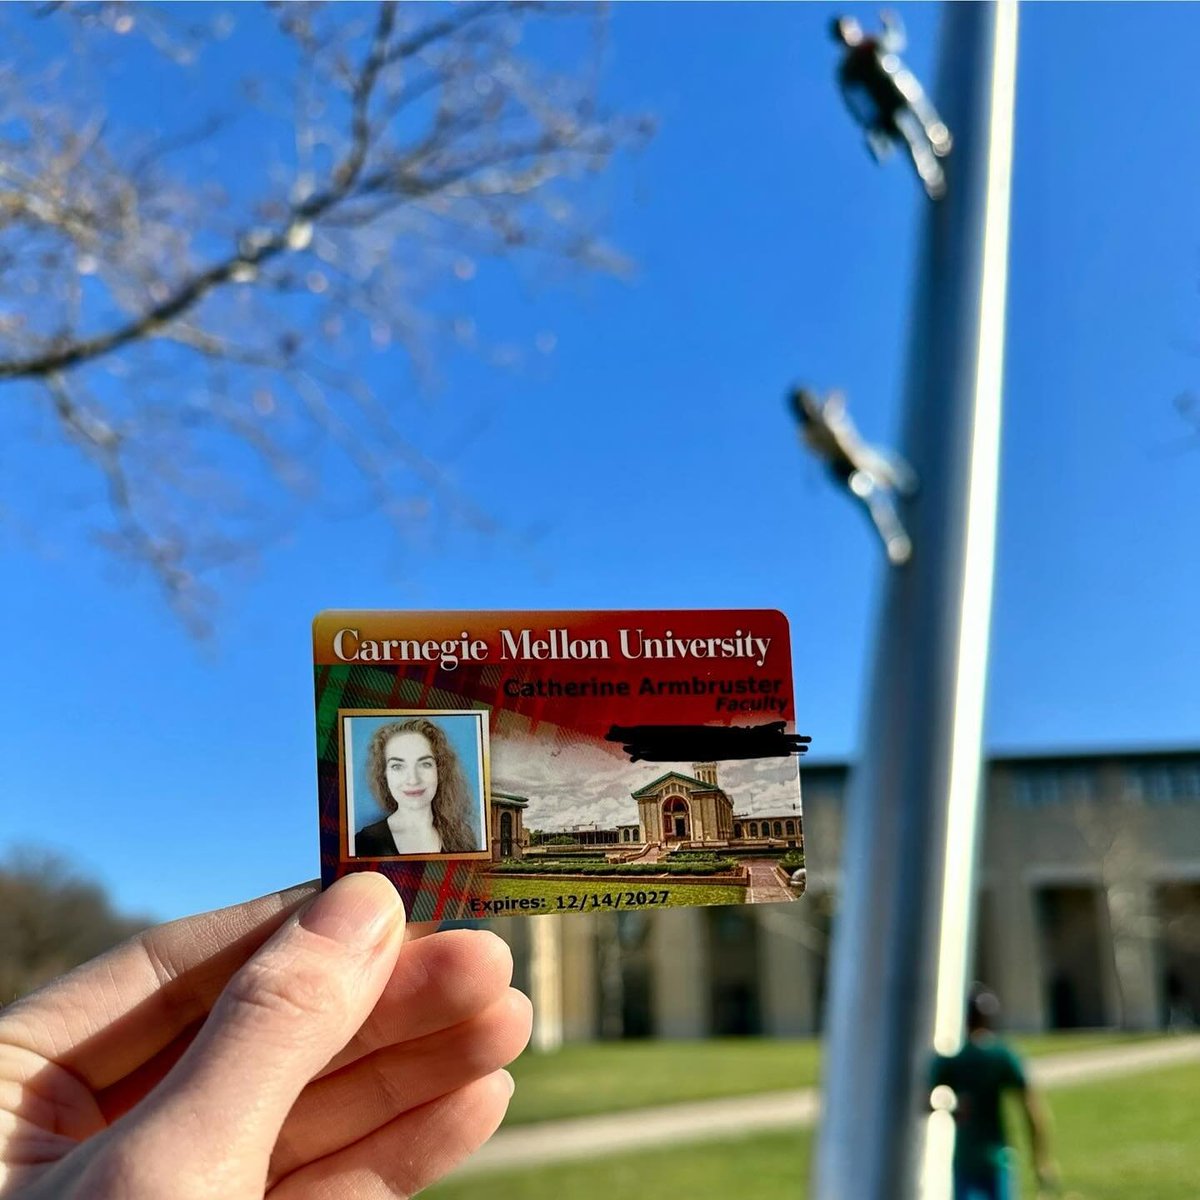 The Armbruster Lab is officially open in the Department of Biological Sciences at Carnegie Mellon University in Pittsburgh!  We're studying how bacteria in biofilms persist in the built environment & transition into the host to cause infections. Happy to be here! 🤓